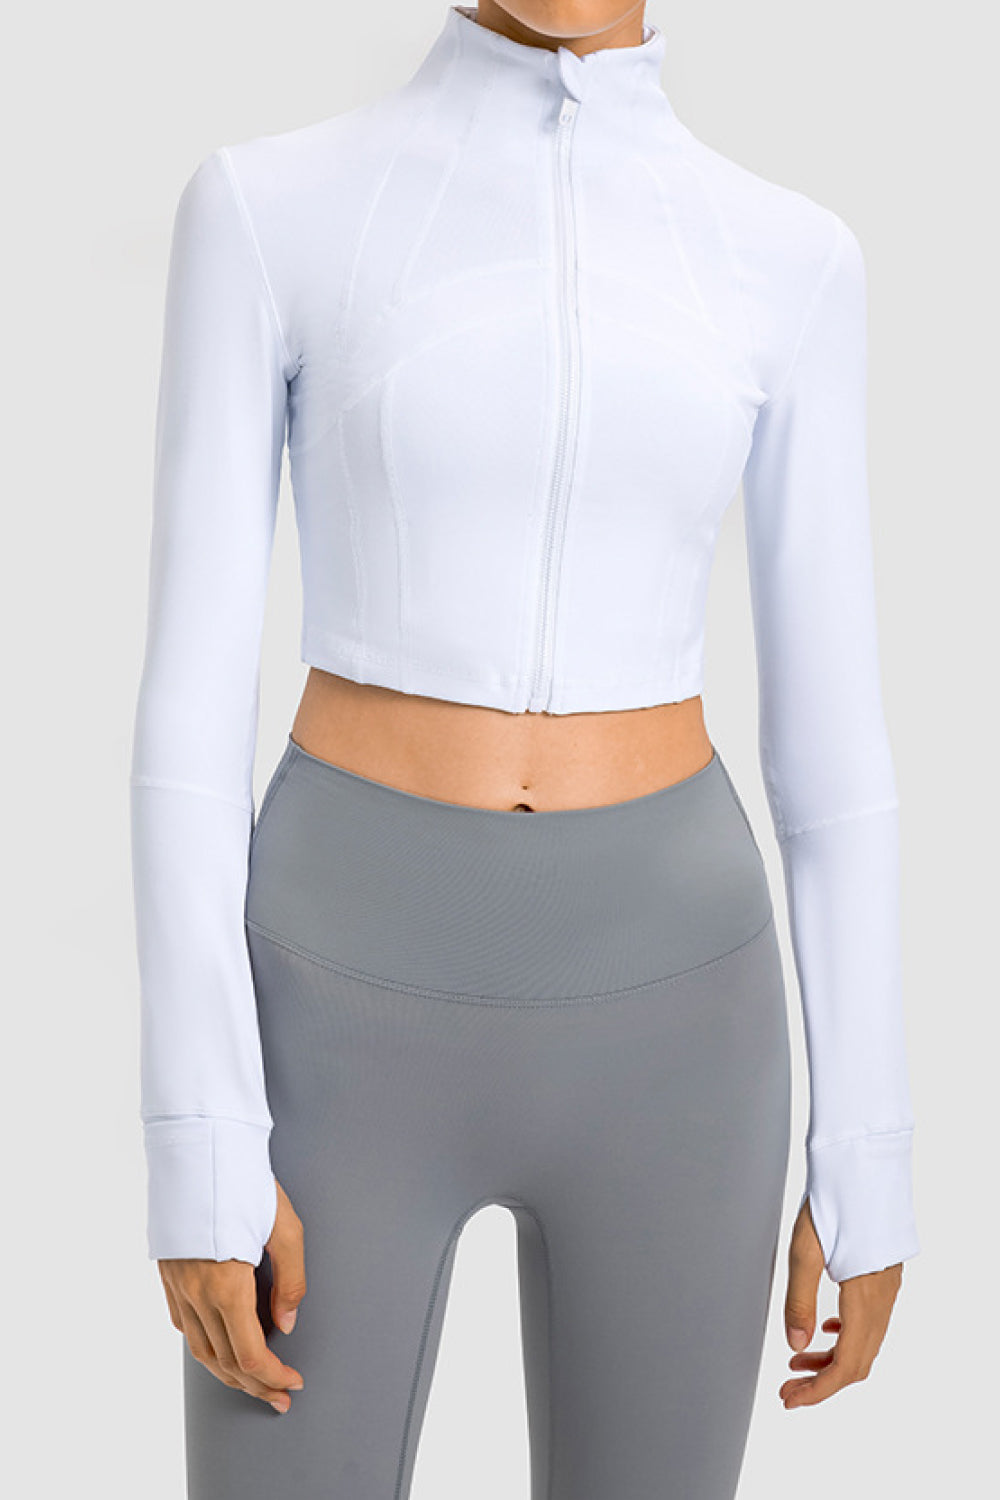 VILLA ACTIVE Zip Front Cropped Sports Jacket ☛ Multiple Colors Available ☚